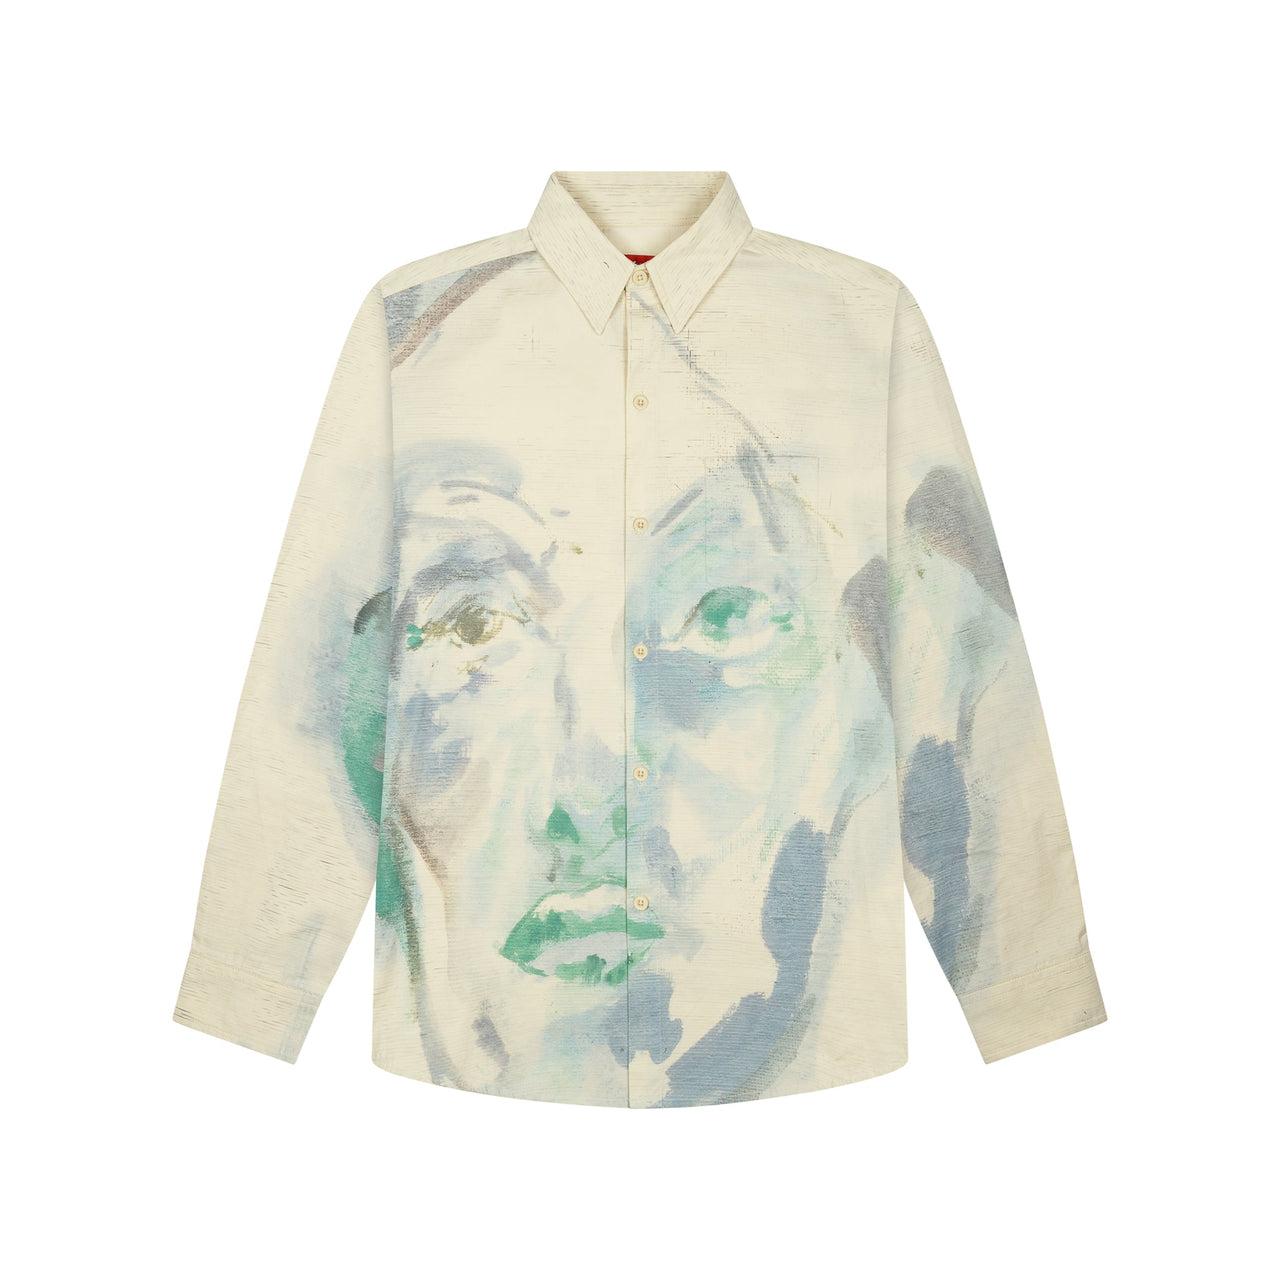 Painted Face Button Up [Tan/Blue]